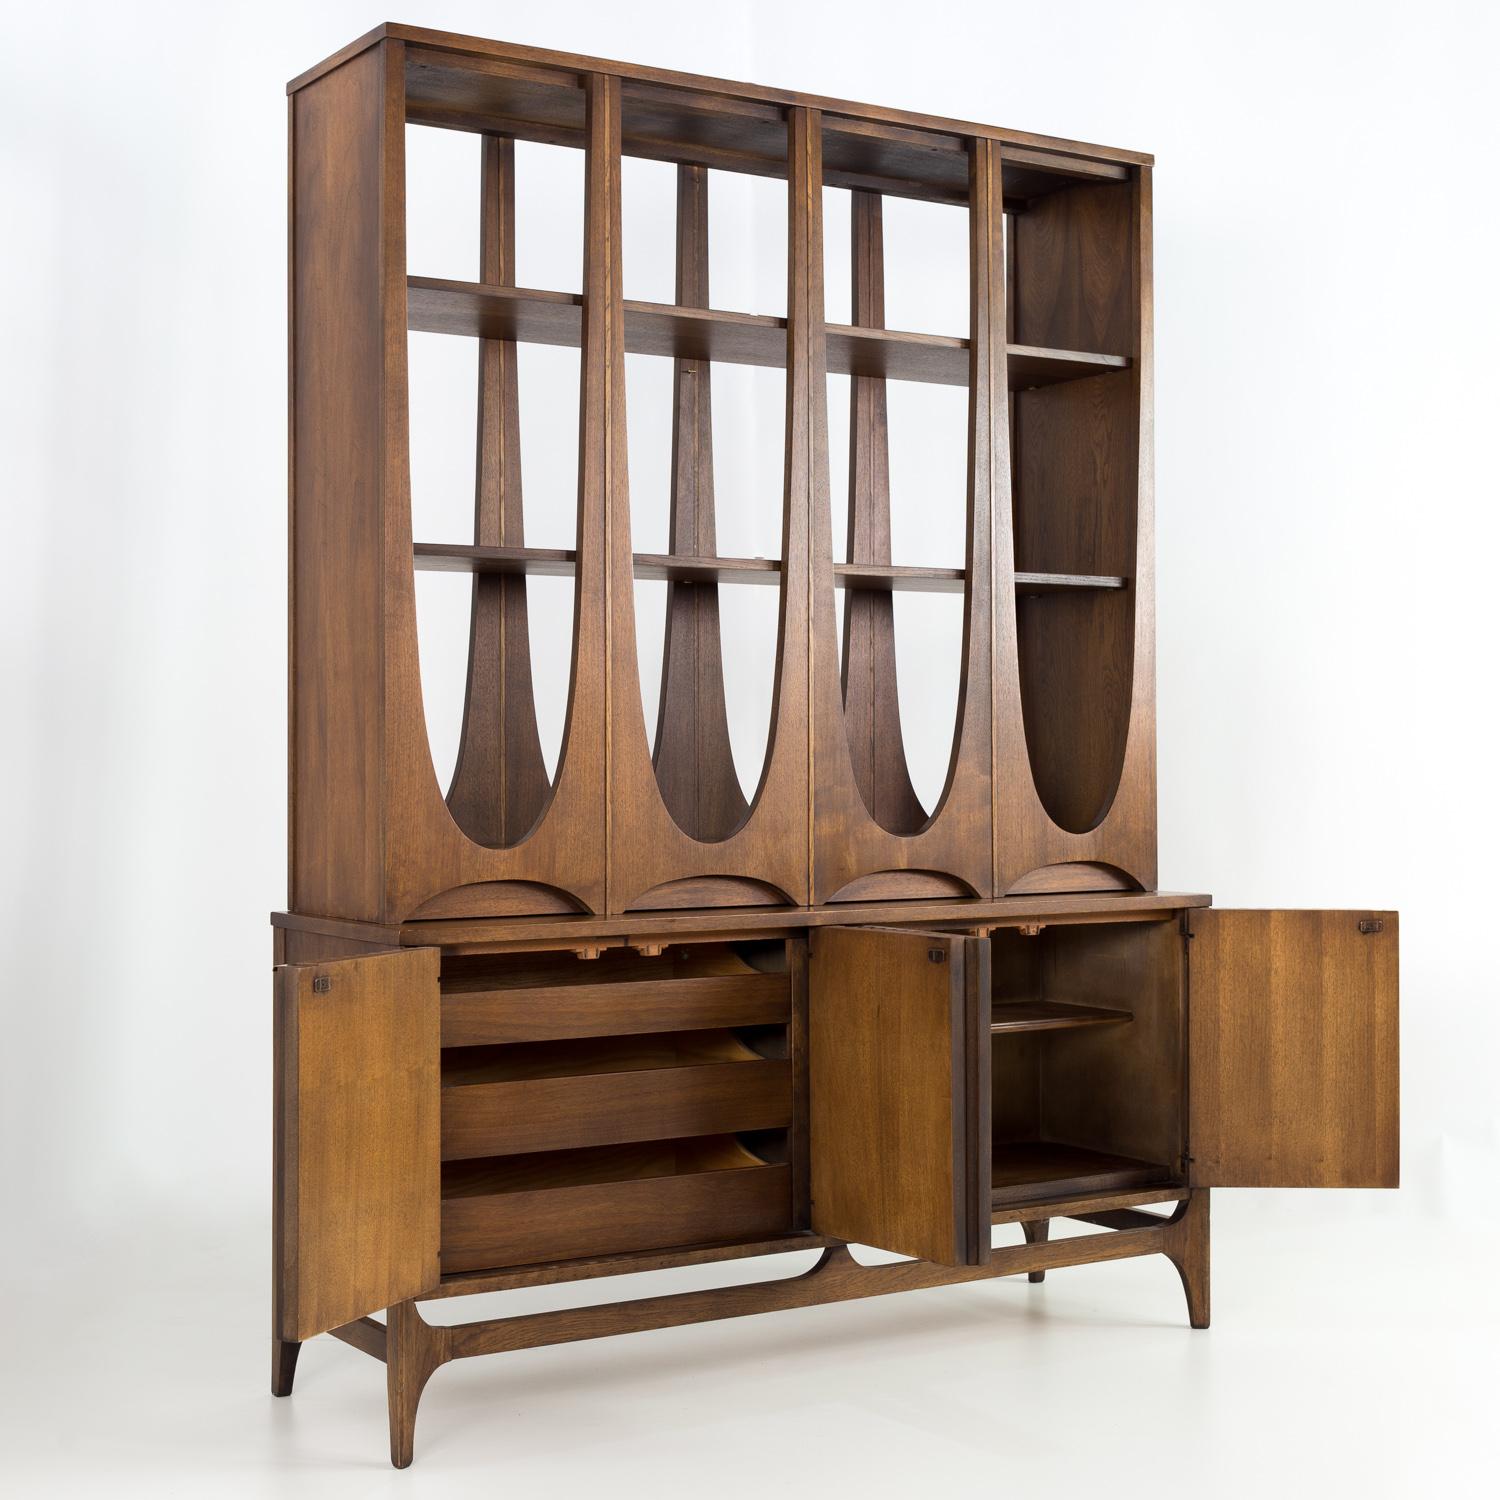 American Broyhill Brasilia Mid Century Room Divider Wall Unit Shelving For Sale